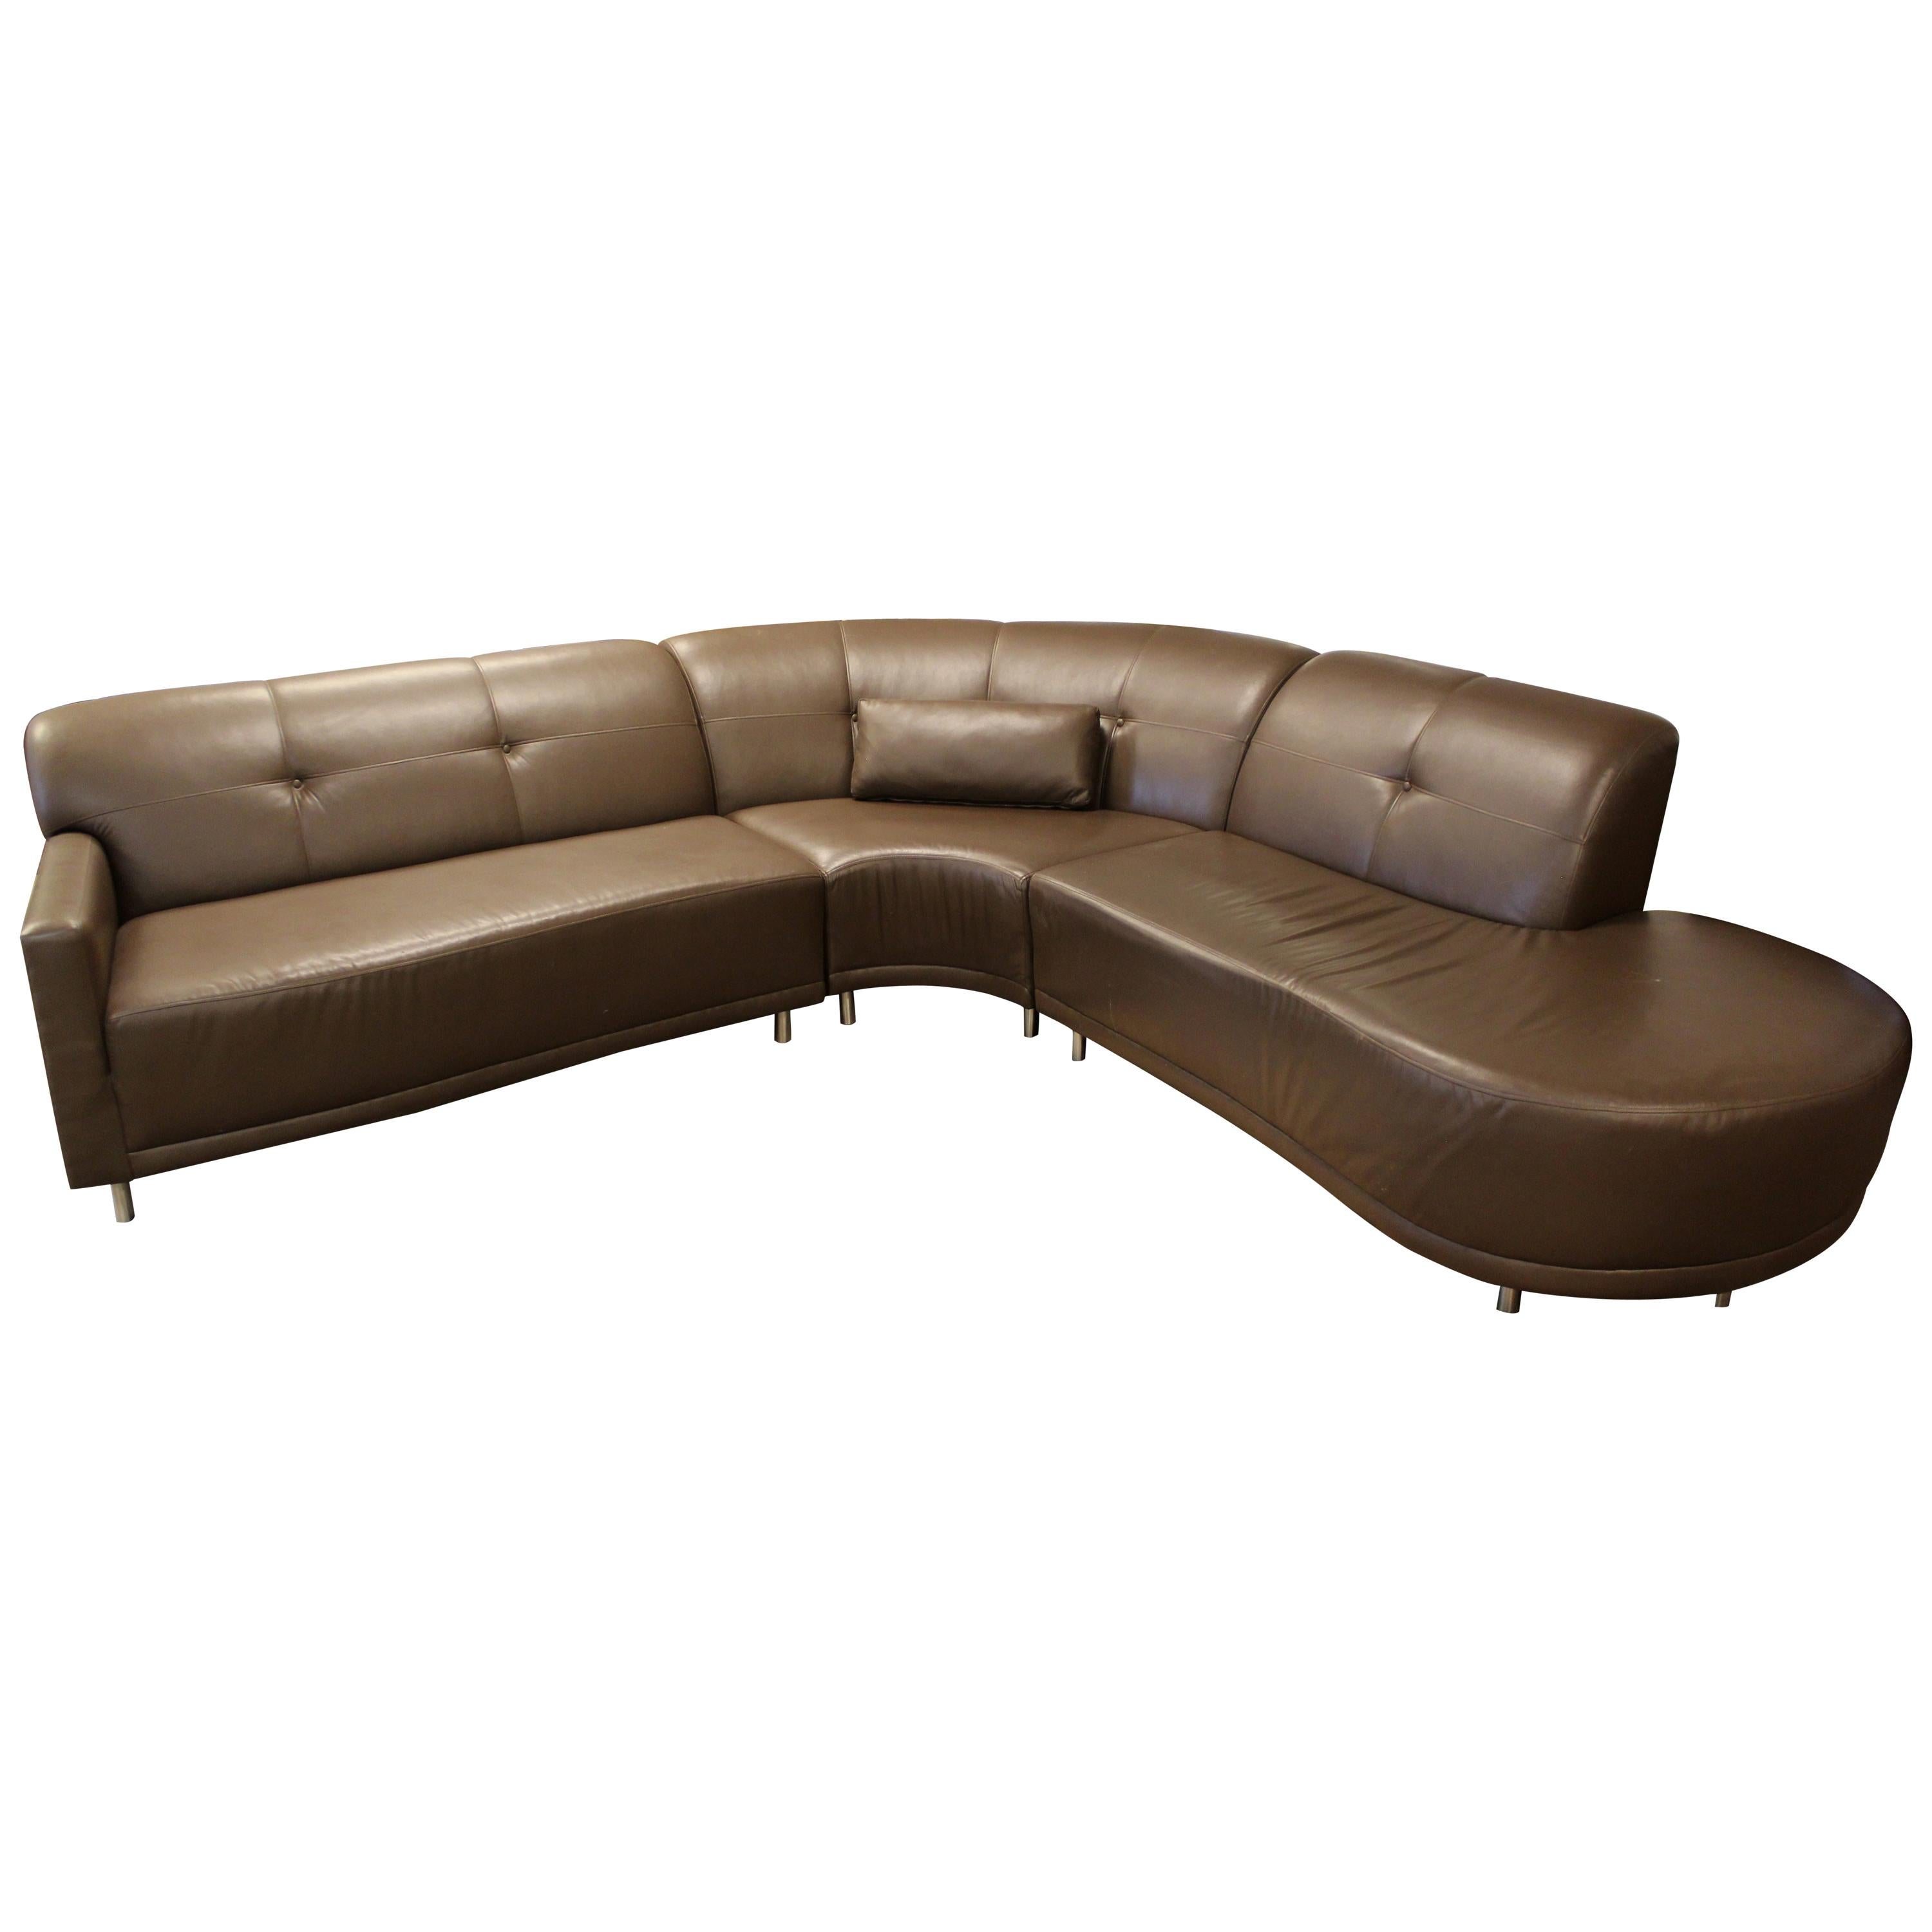 Contemporary Modern Brown Leather 3 Pc Curved Sectional Sofa